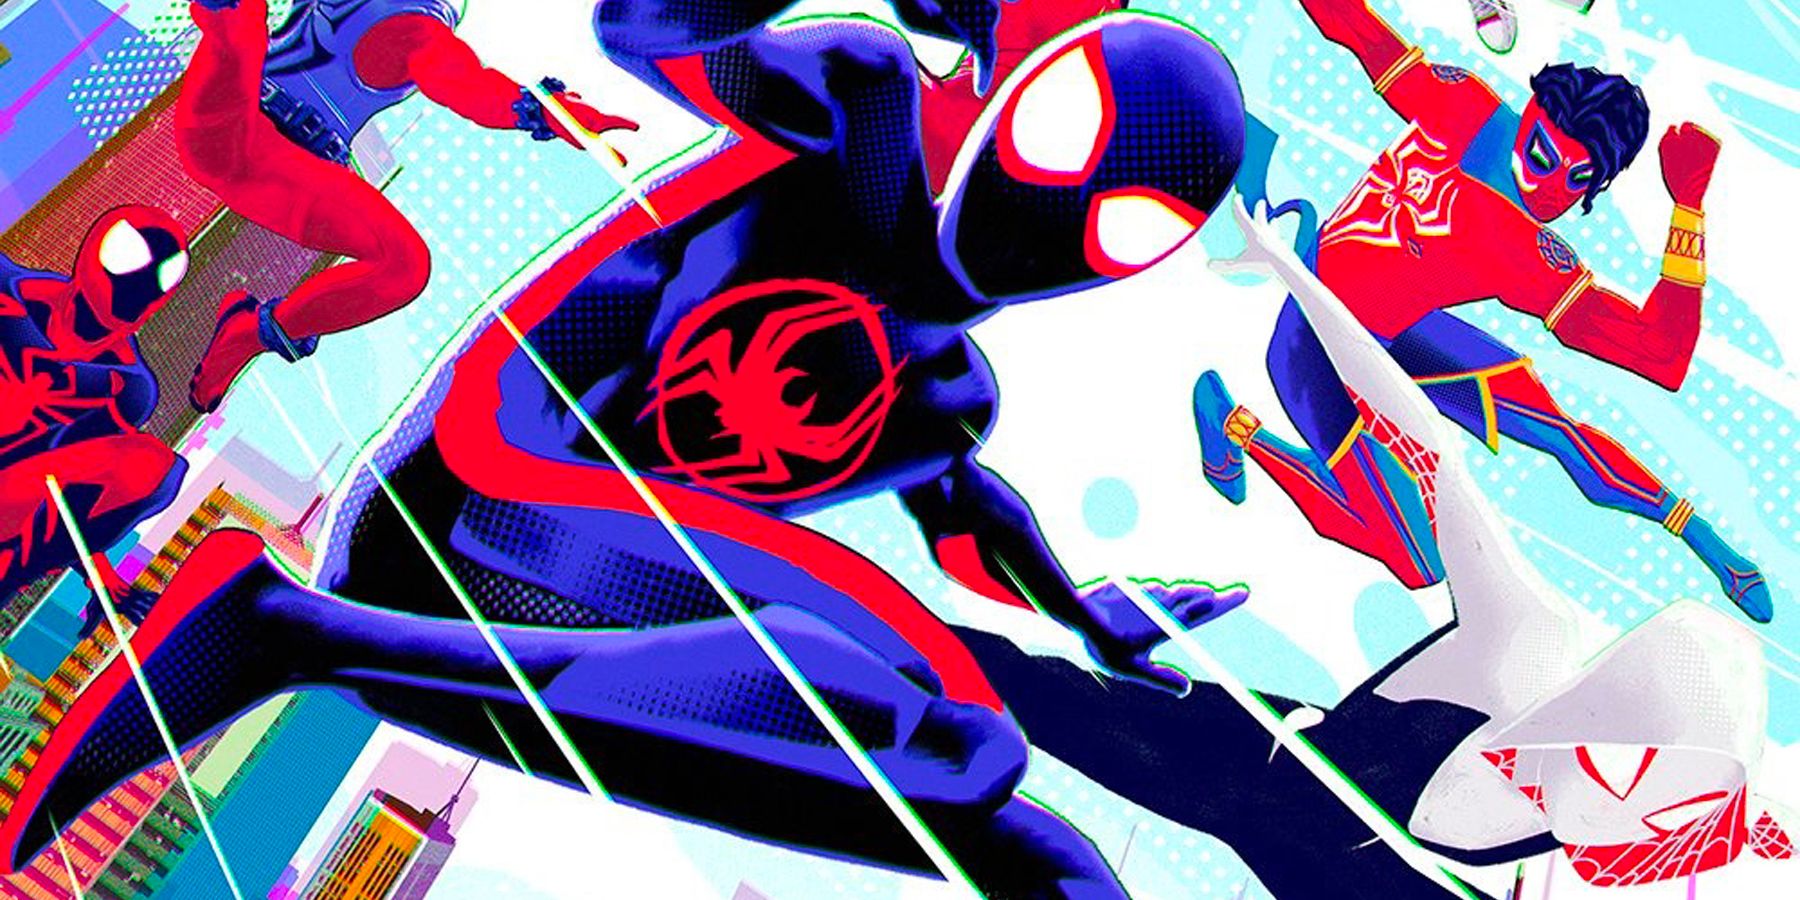 Spider-Man: Beyond the Spider-Verse: Release Date, Cast, News and More